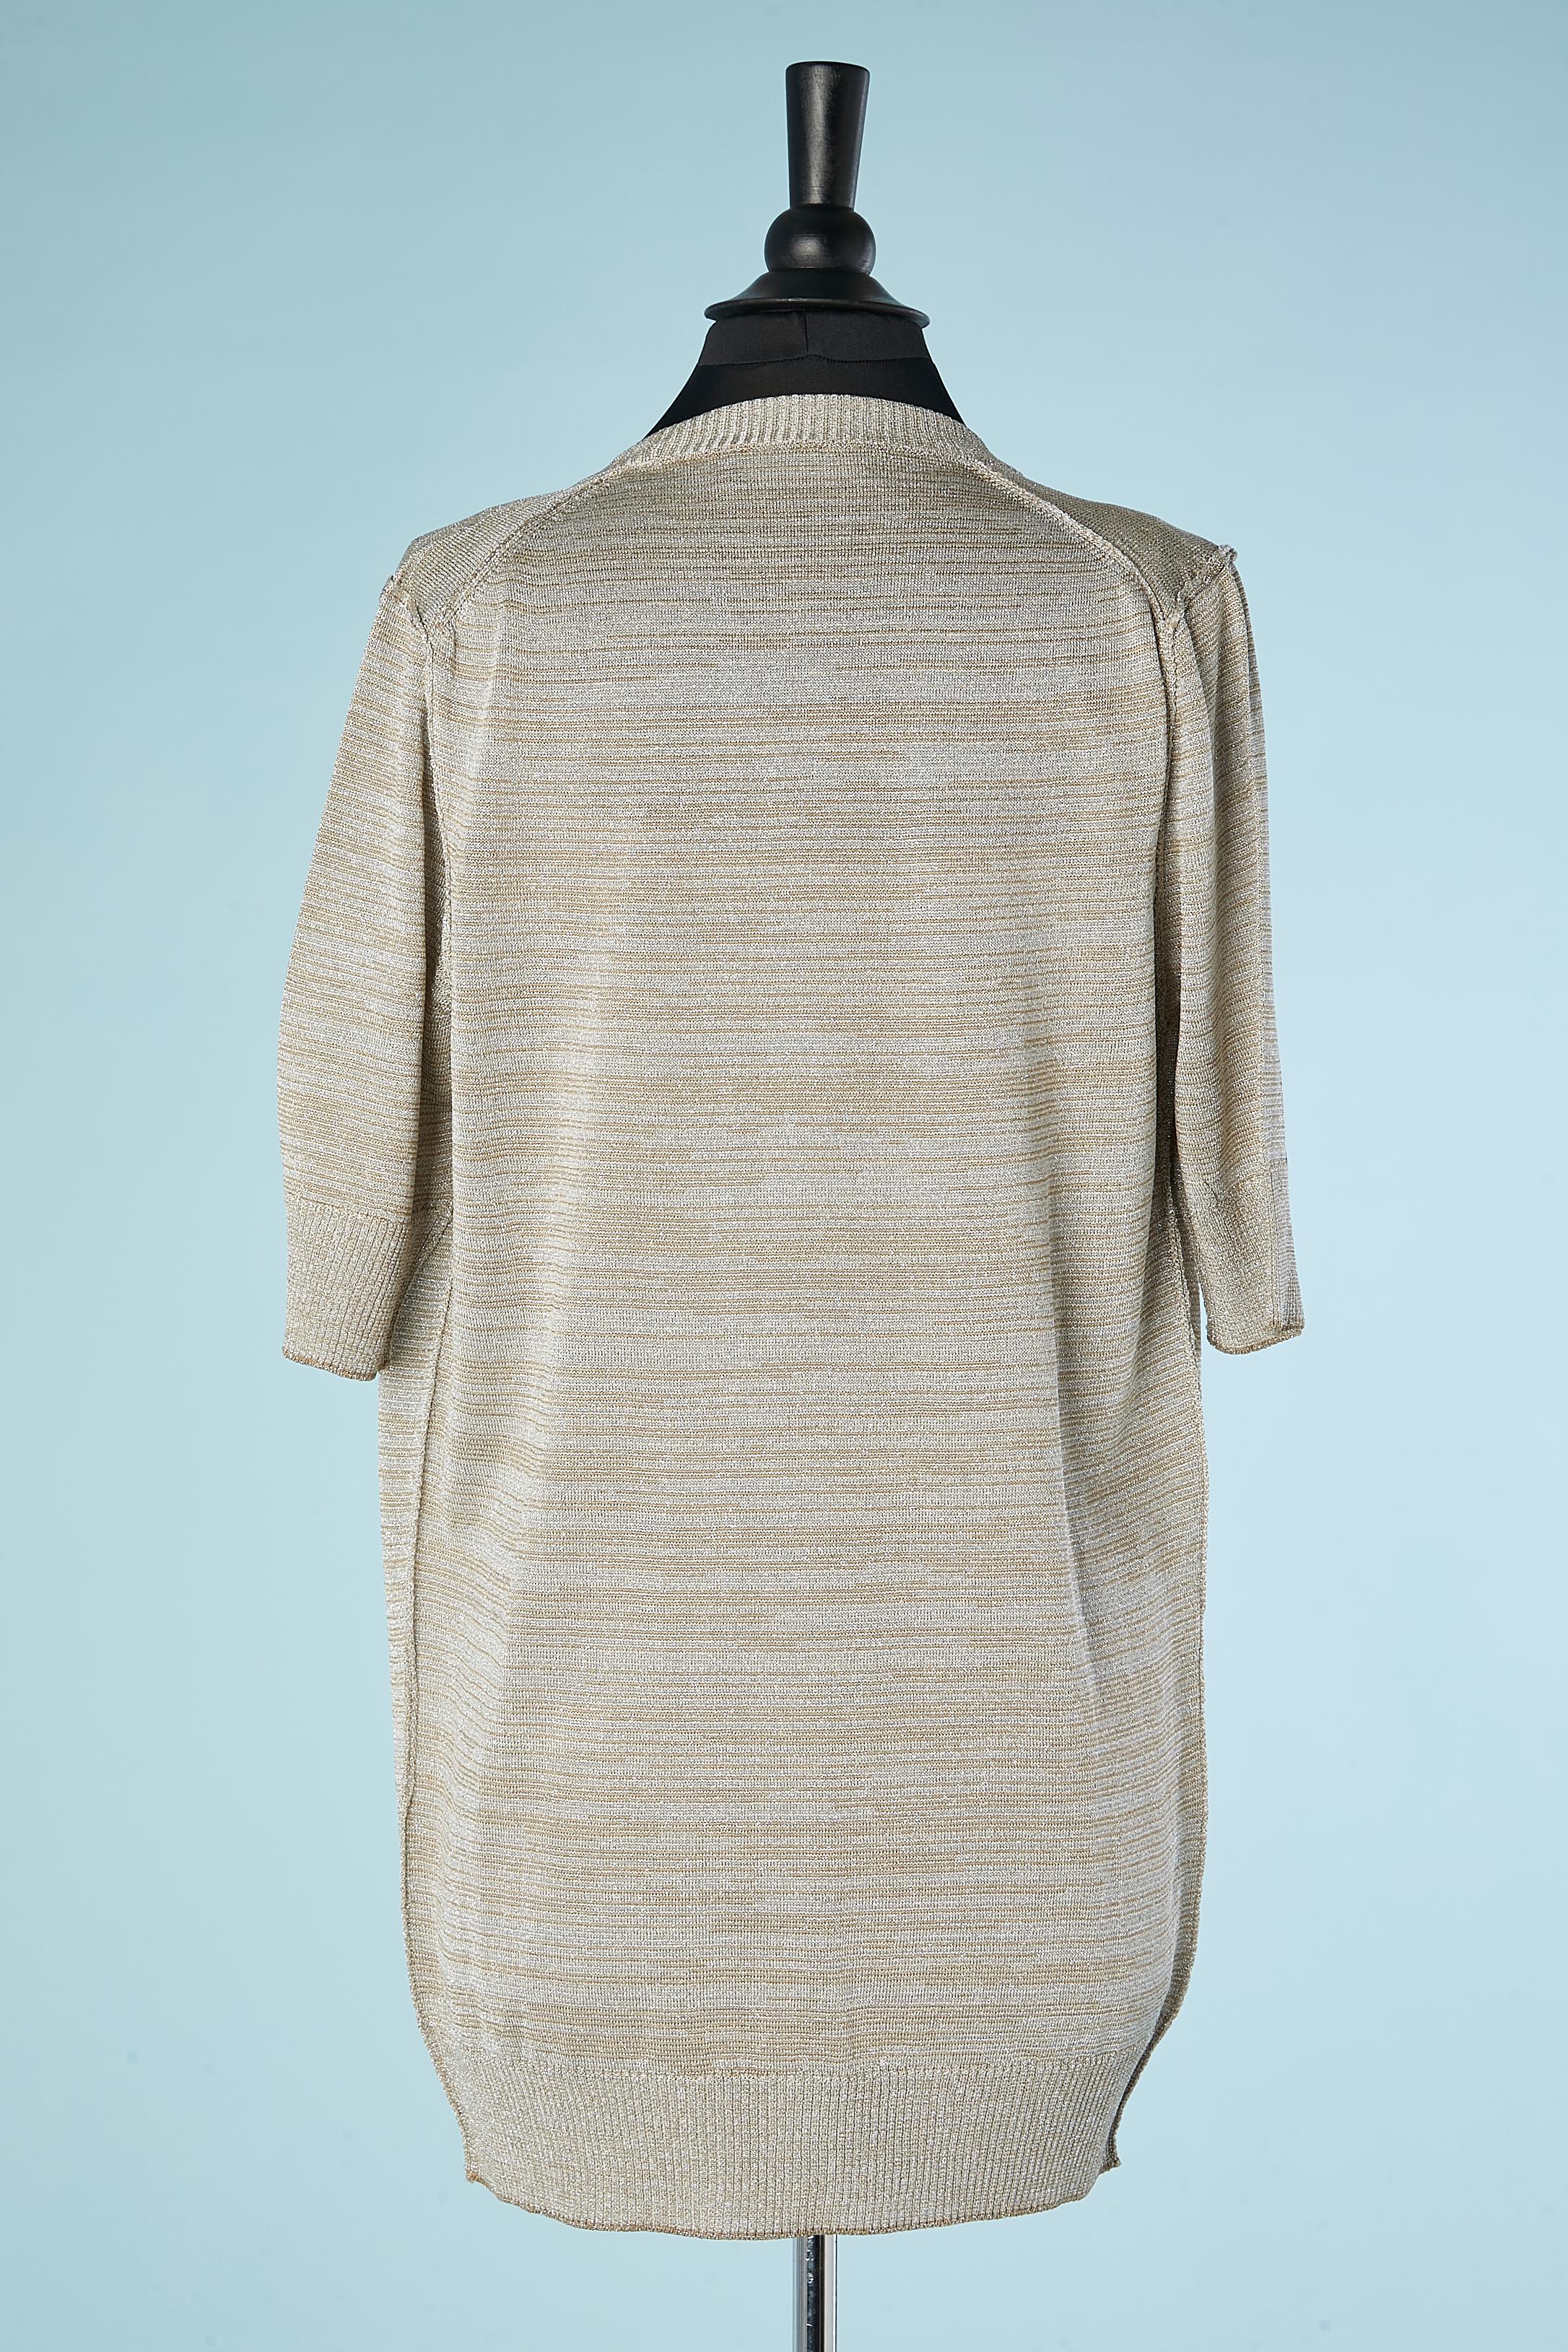 Silver and gold lurex knit mini-dress  and cardigan  Dolce & Gabbana For Sale 3